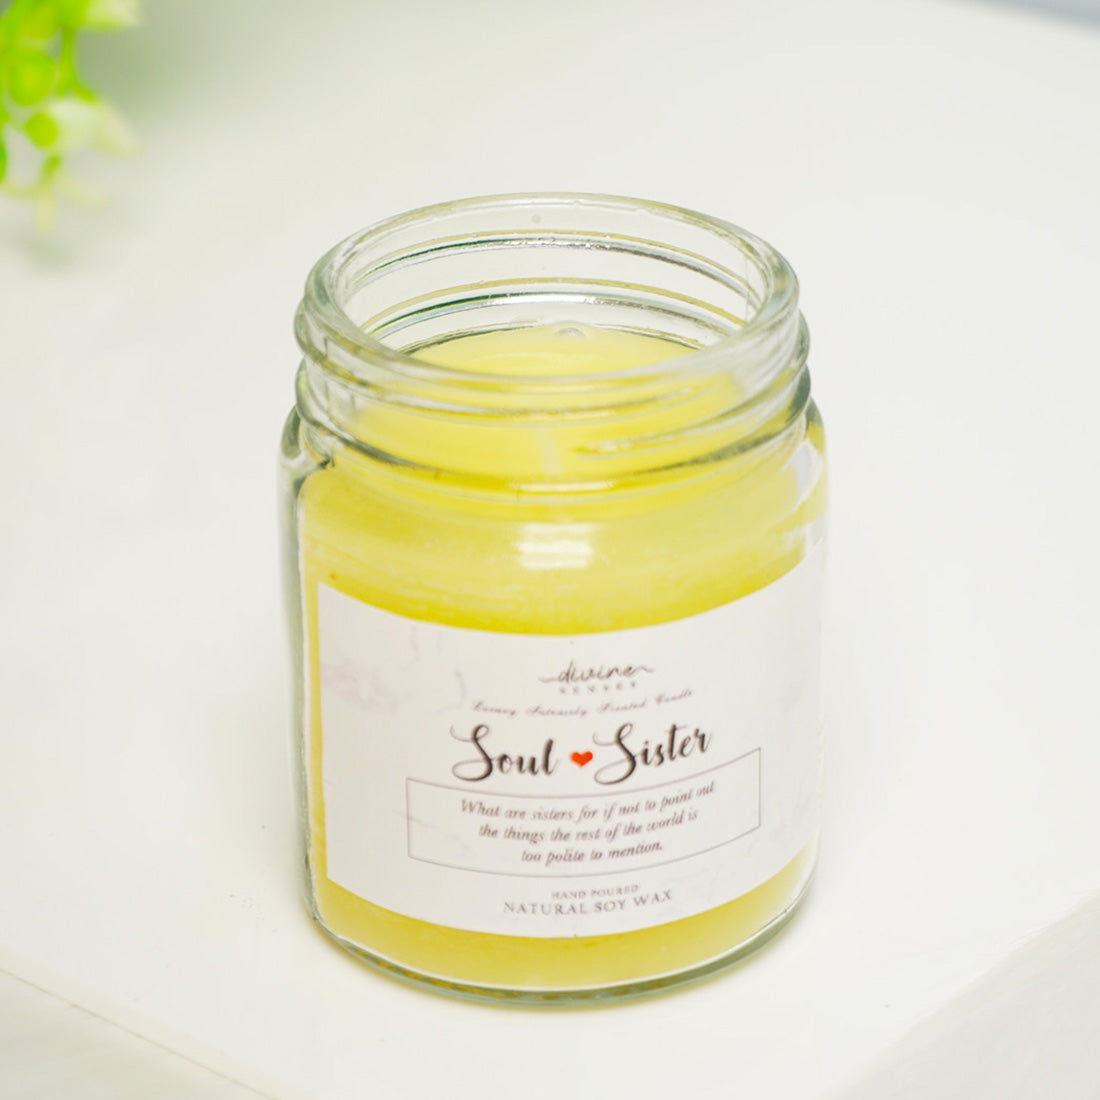 Soul Sister Scented Candle